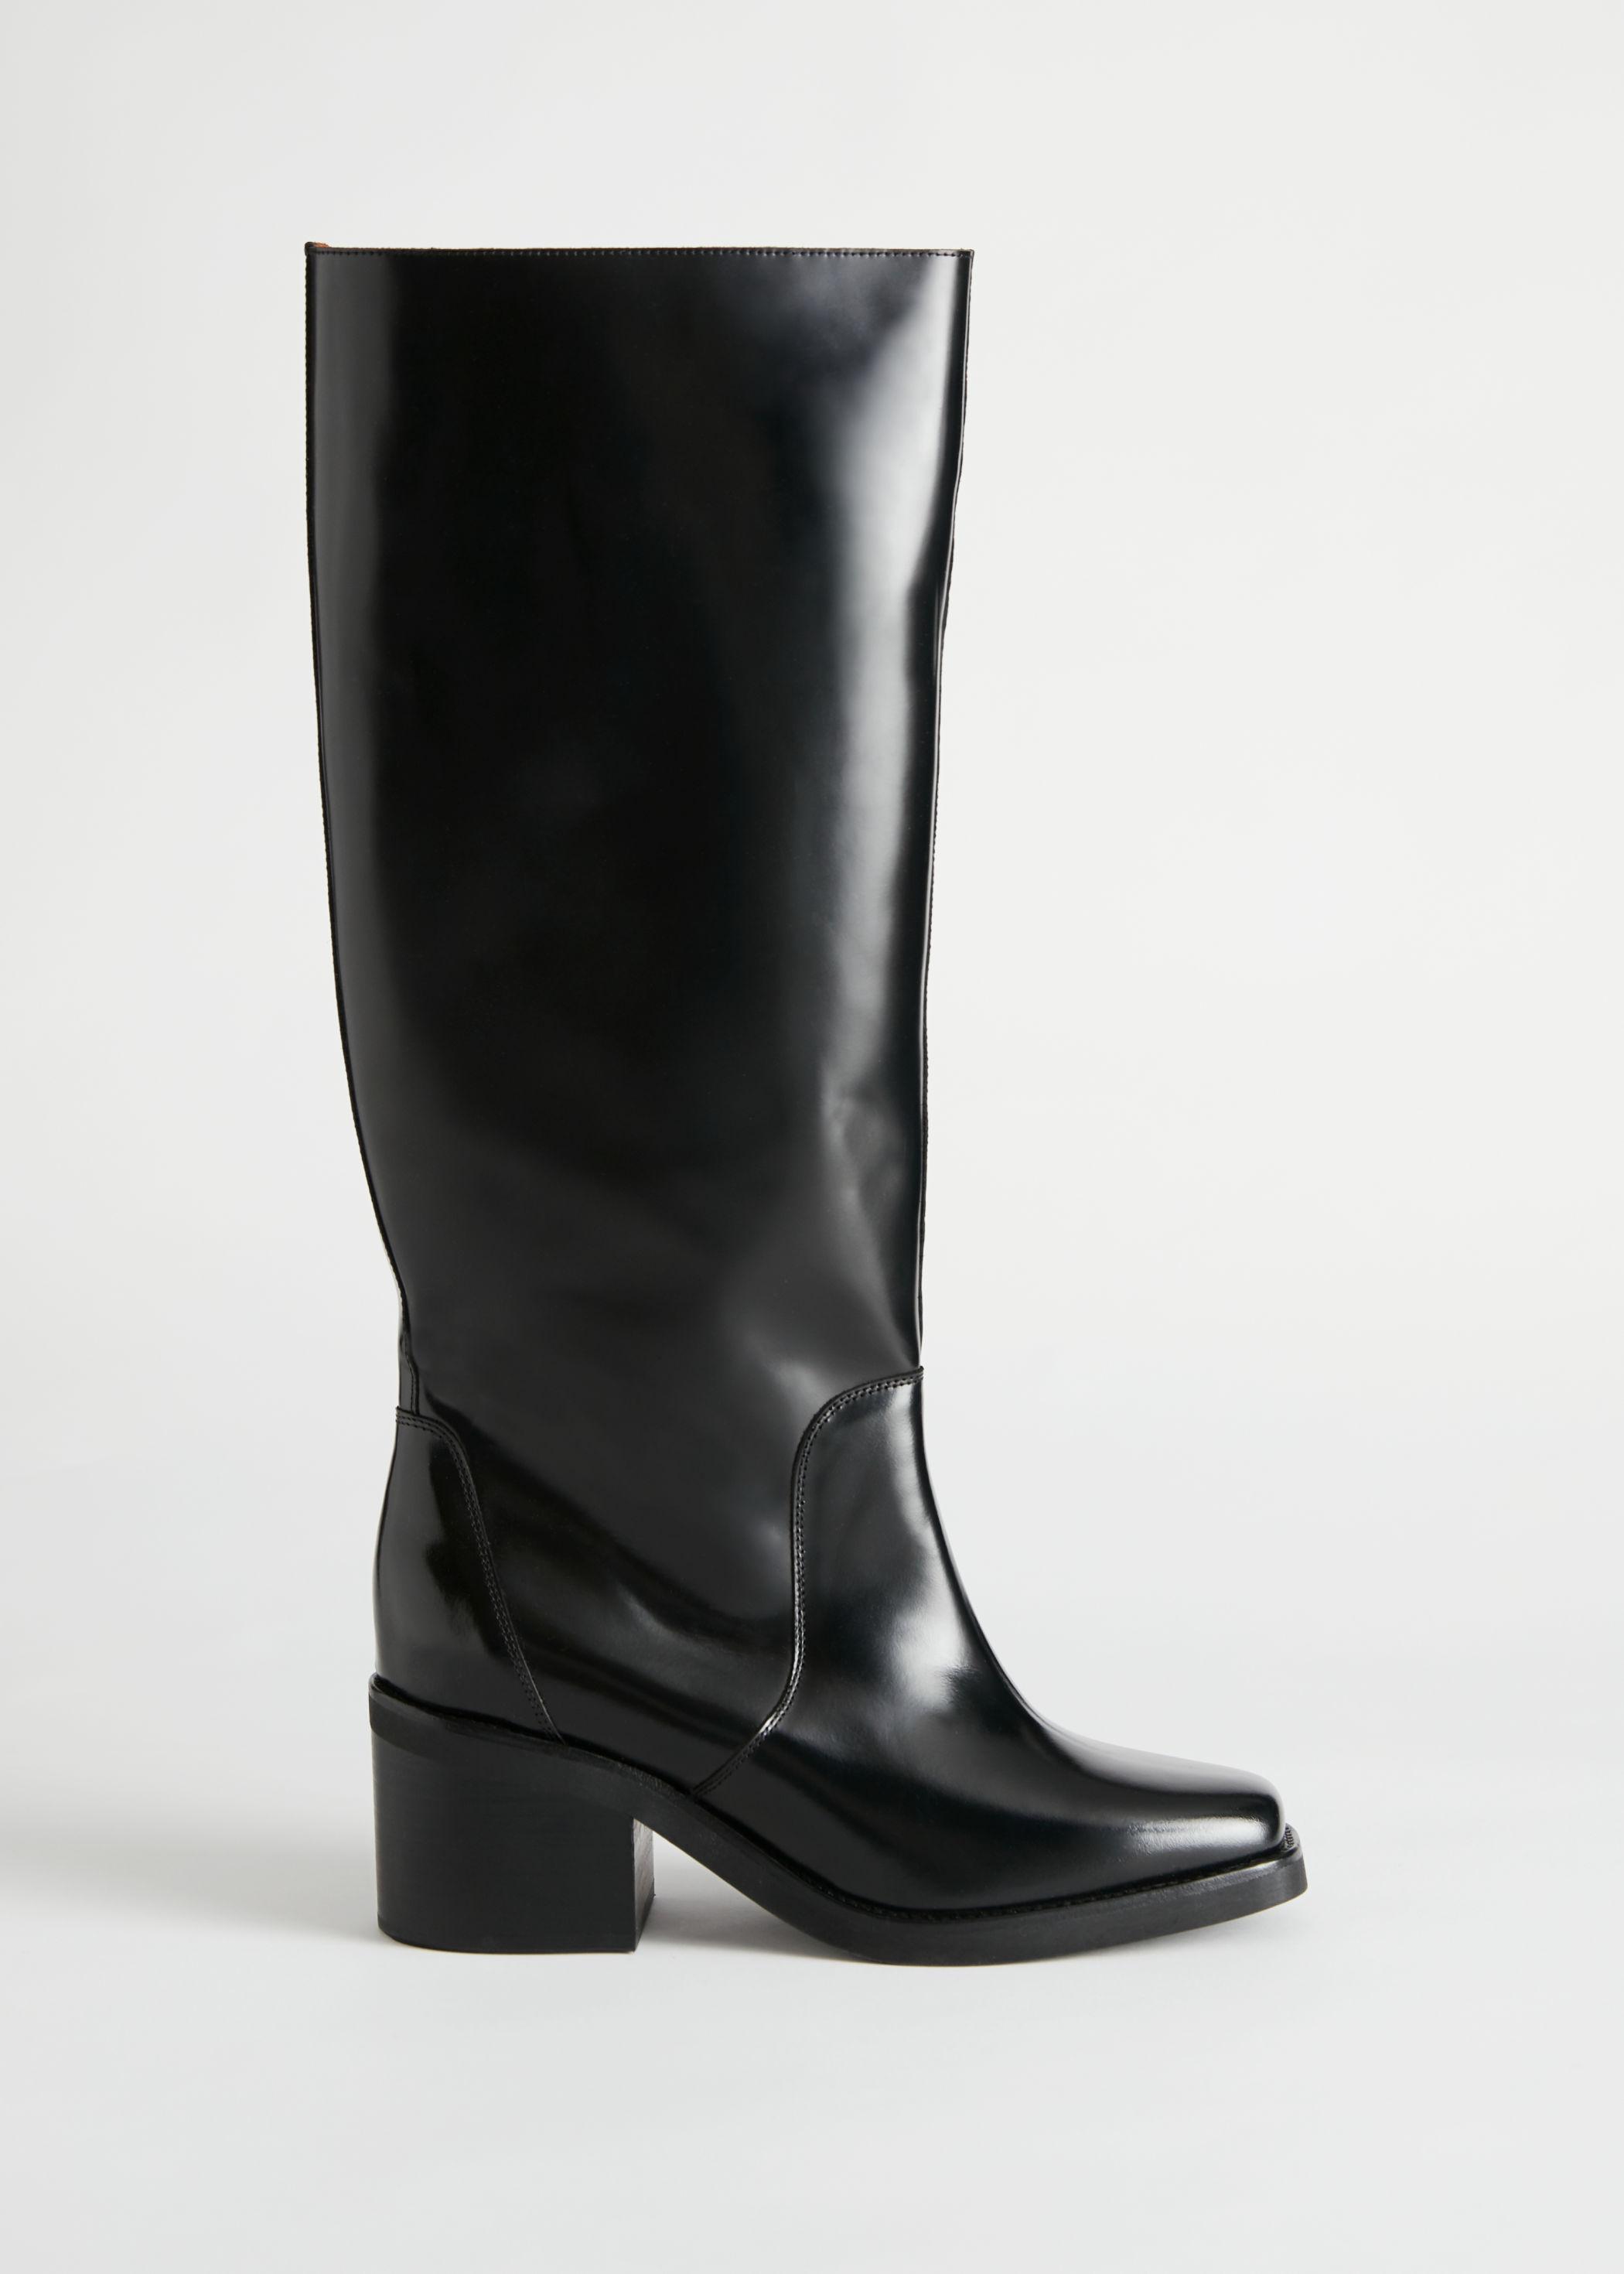 & Other Stories Square Toe Knee High Leather Boots in Black | Lyst